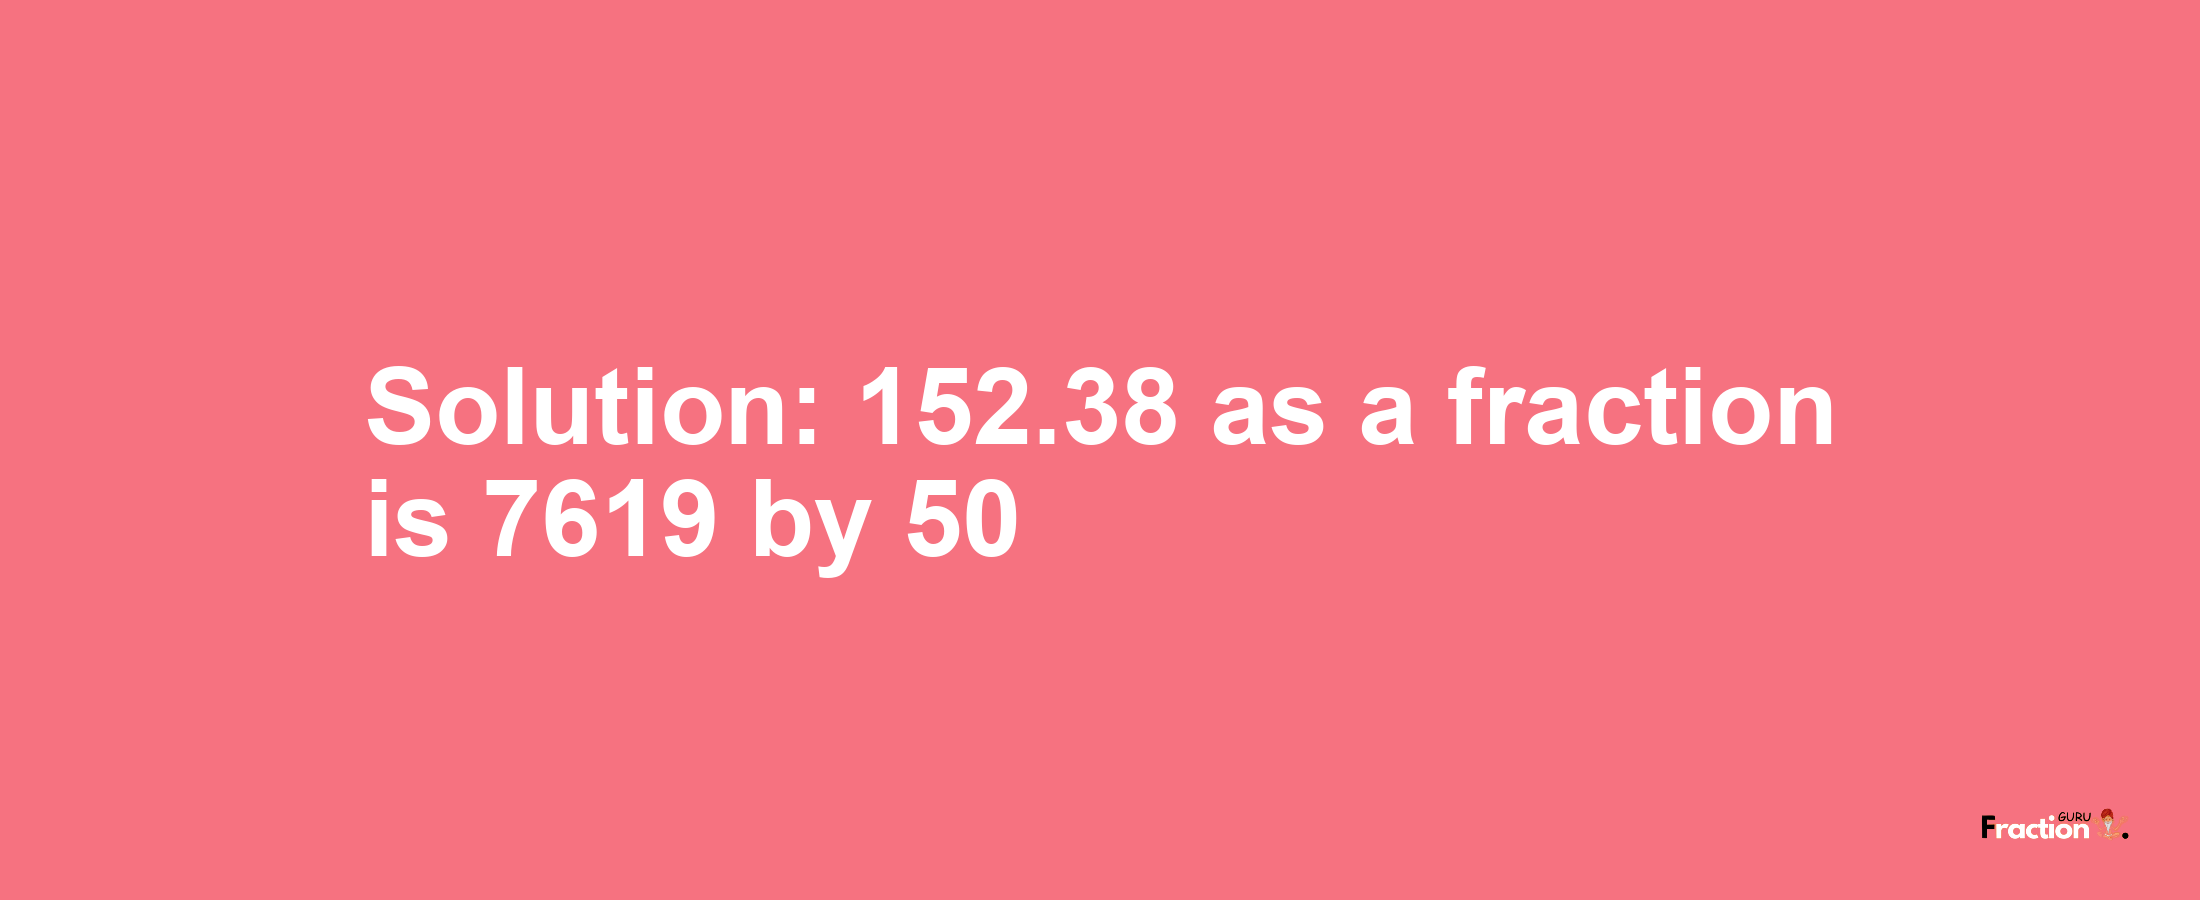 Solution:152.38 as a fraction is 7619/50